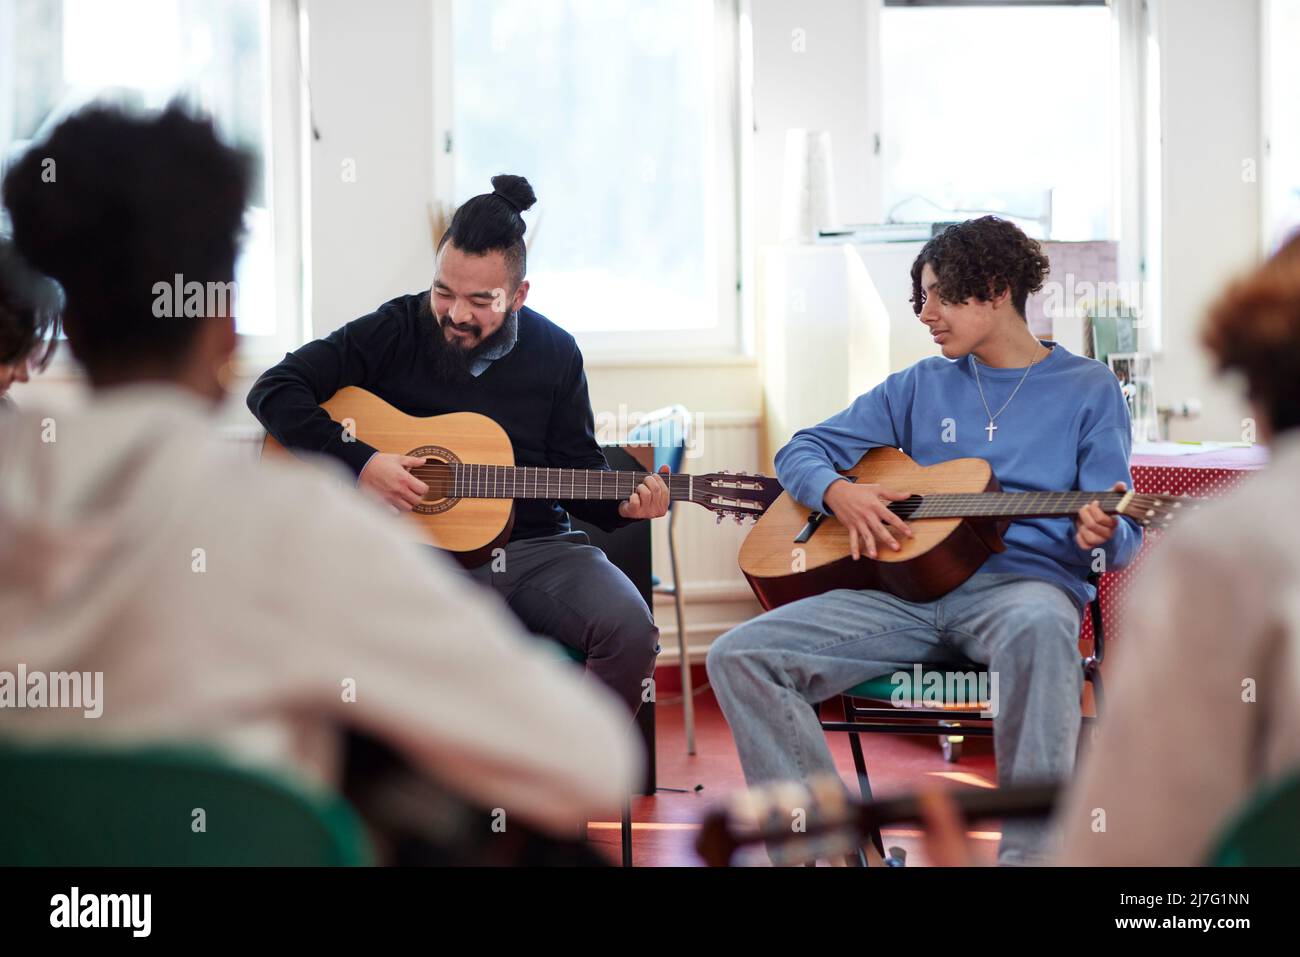 Teenagers attending guitar lesson Stock Photo